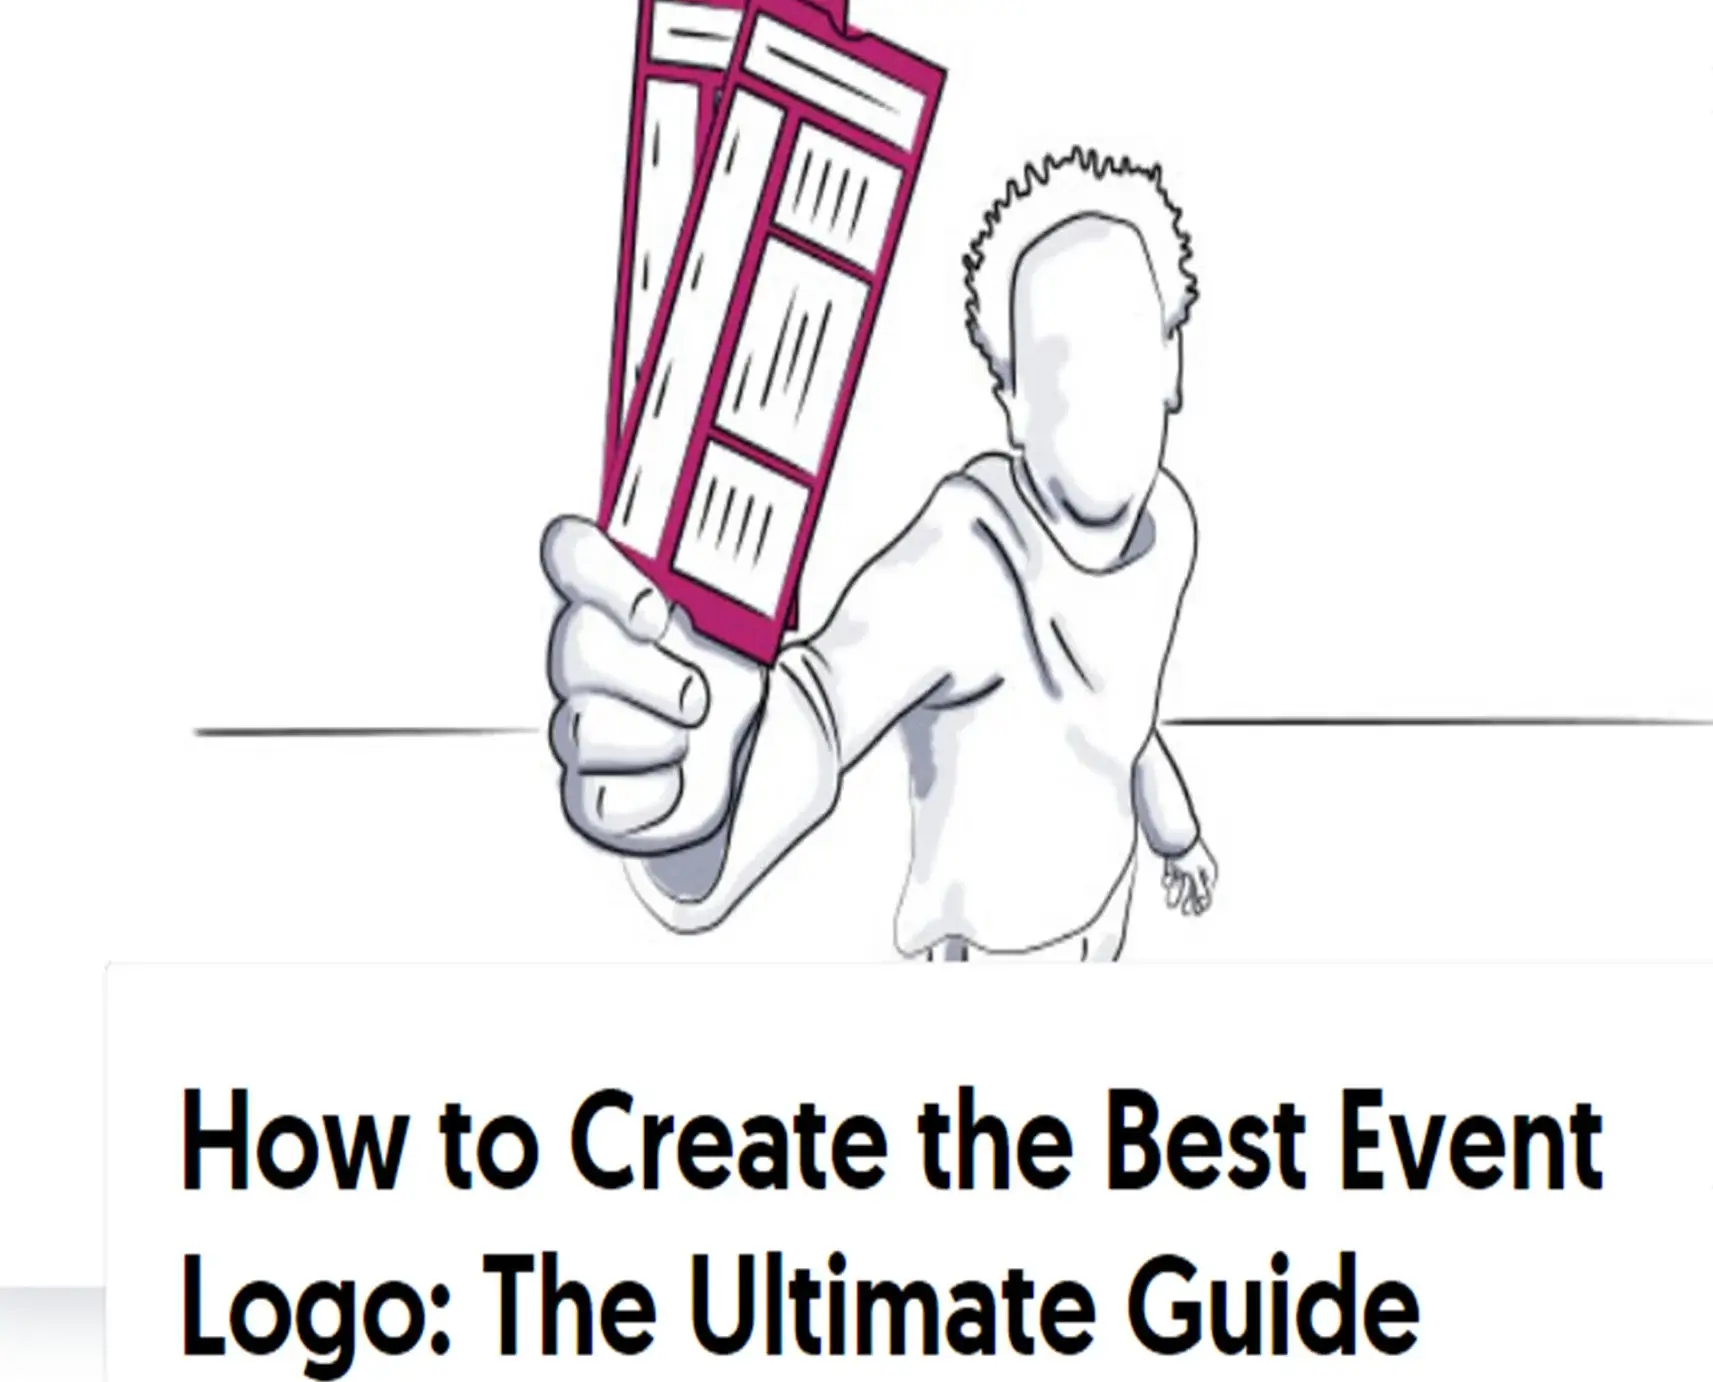 How to Create the Best Event Logo: The Ultimate Guide